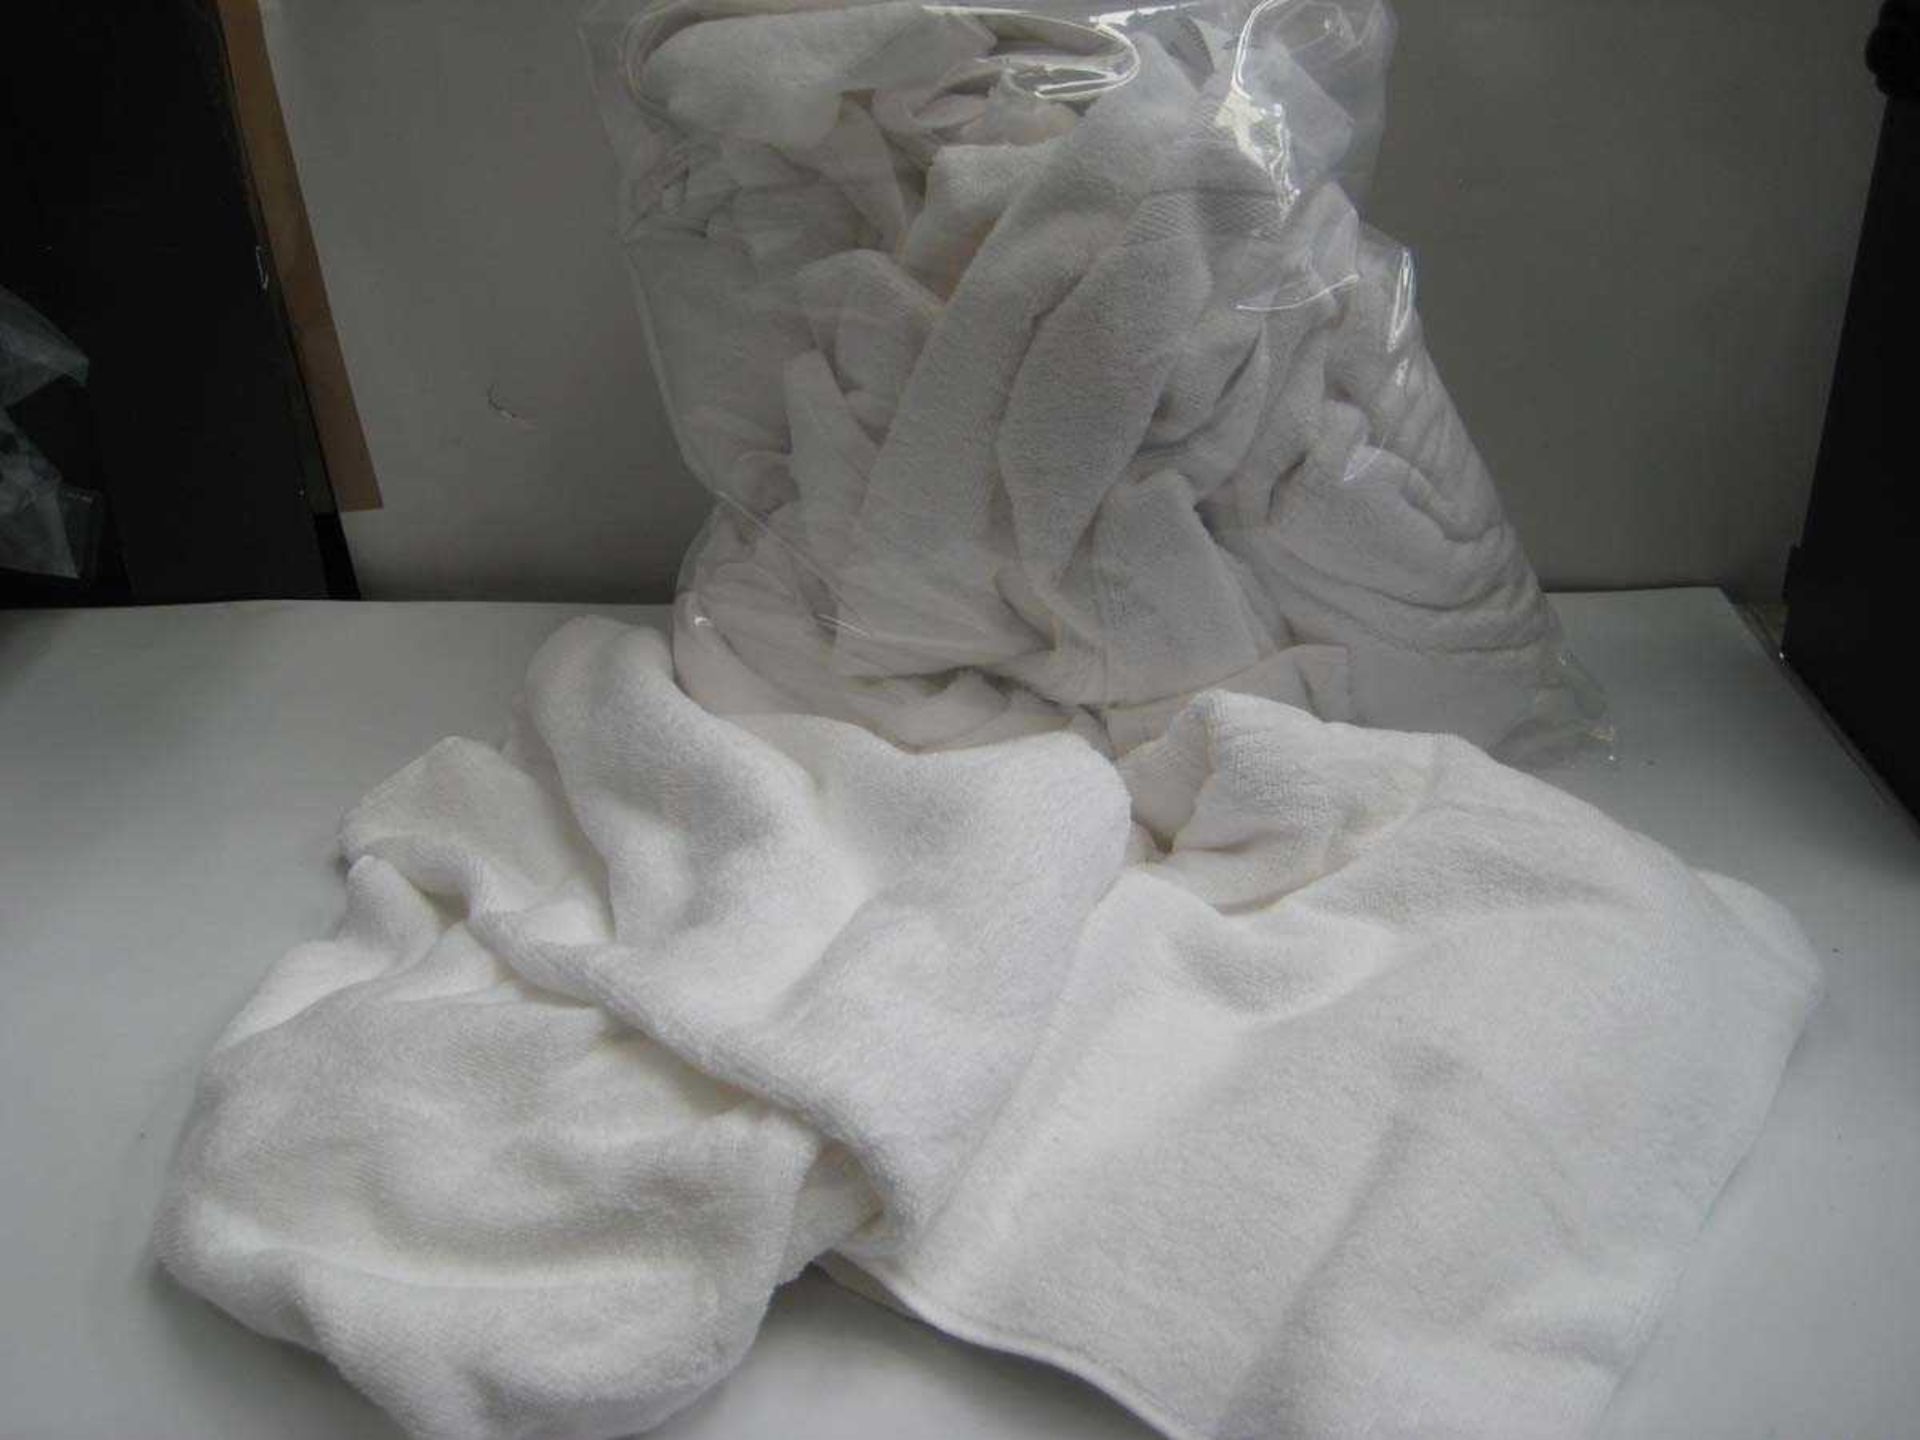 +VAT A bag containing various sizes White Towels.